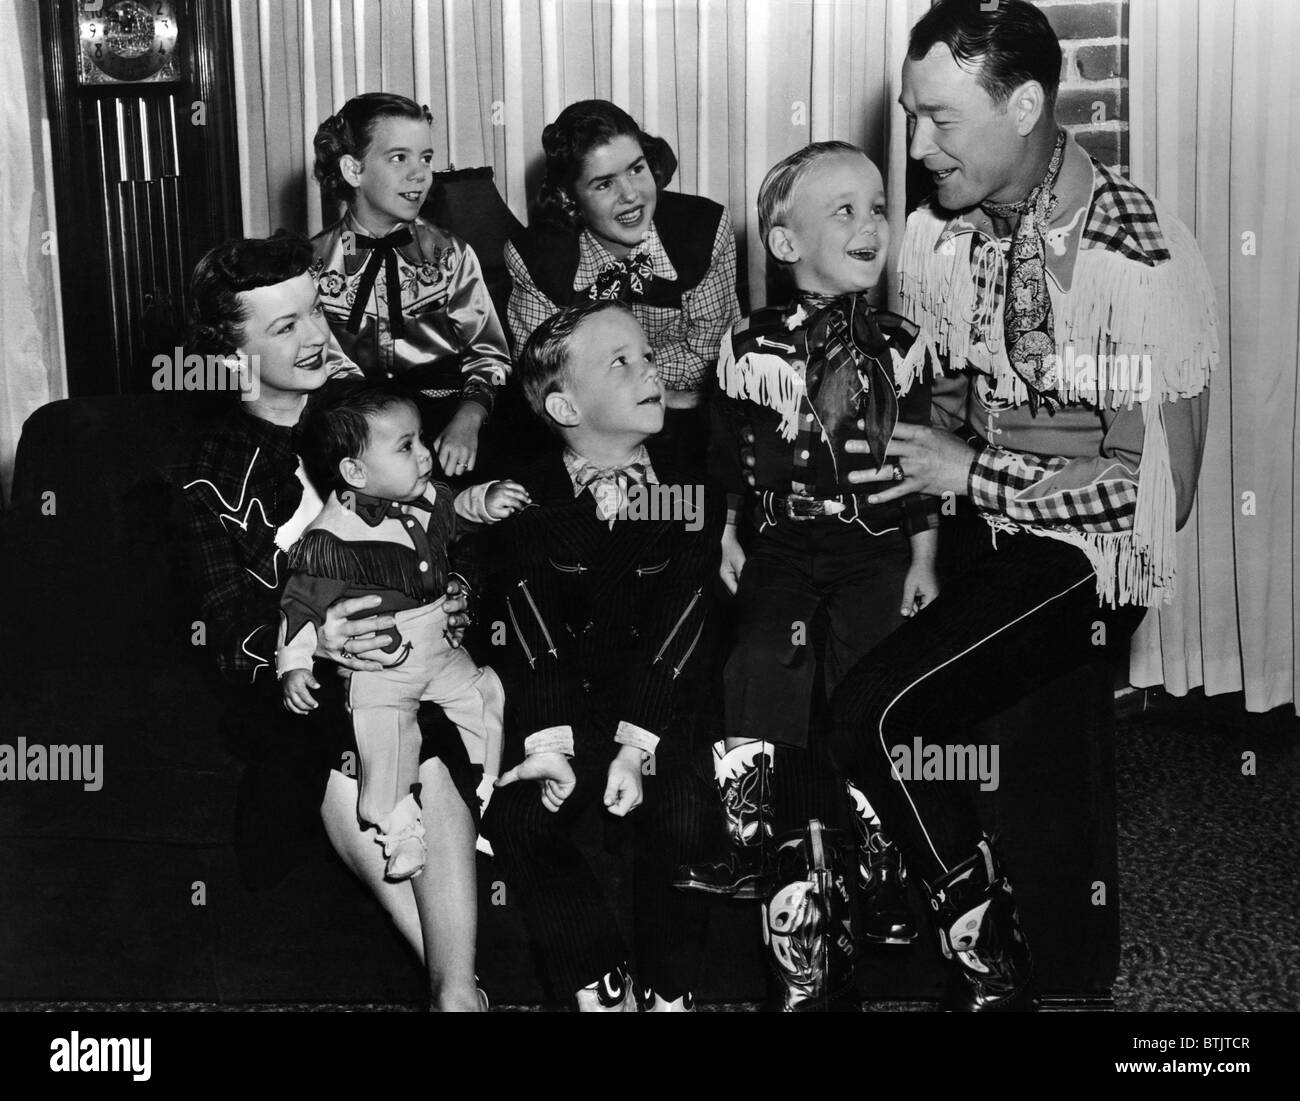 Roy Rogers (right), and his wife Dale Evans (left), with their family, c. 1950's. Stock Photo